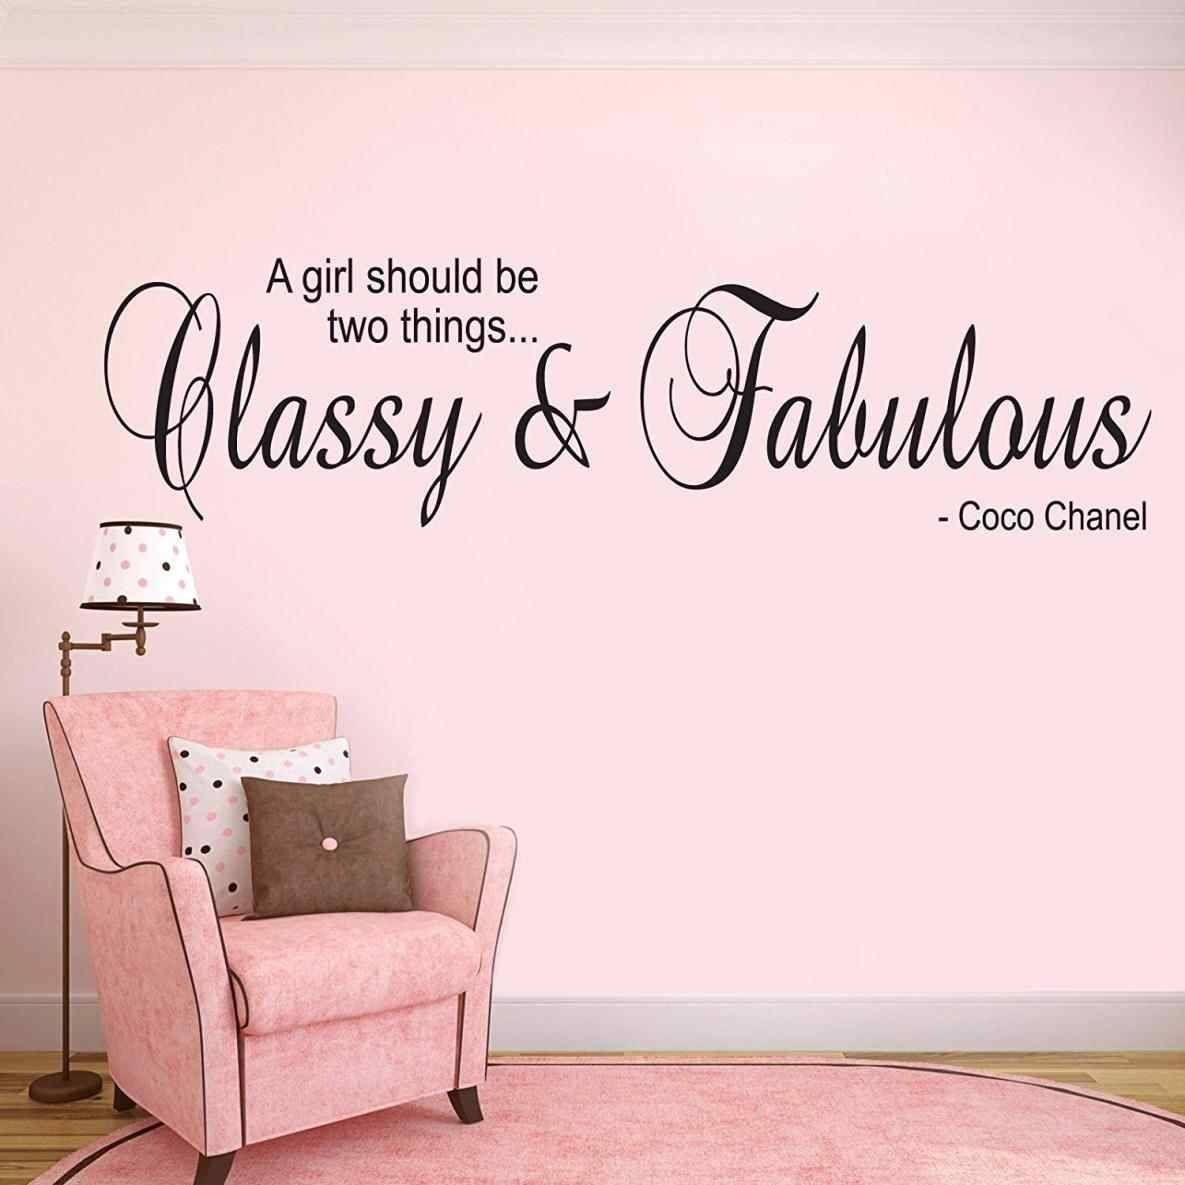 Vuc Coco Chanel Wall Decal Designs Ltd Tm Coco Chanel Classy And With Most Popular Coco Chanel Wall Decals (View 4 of 25)